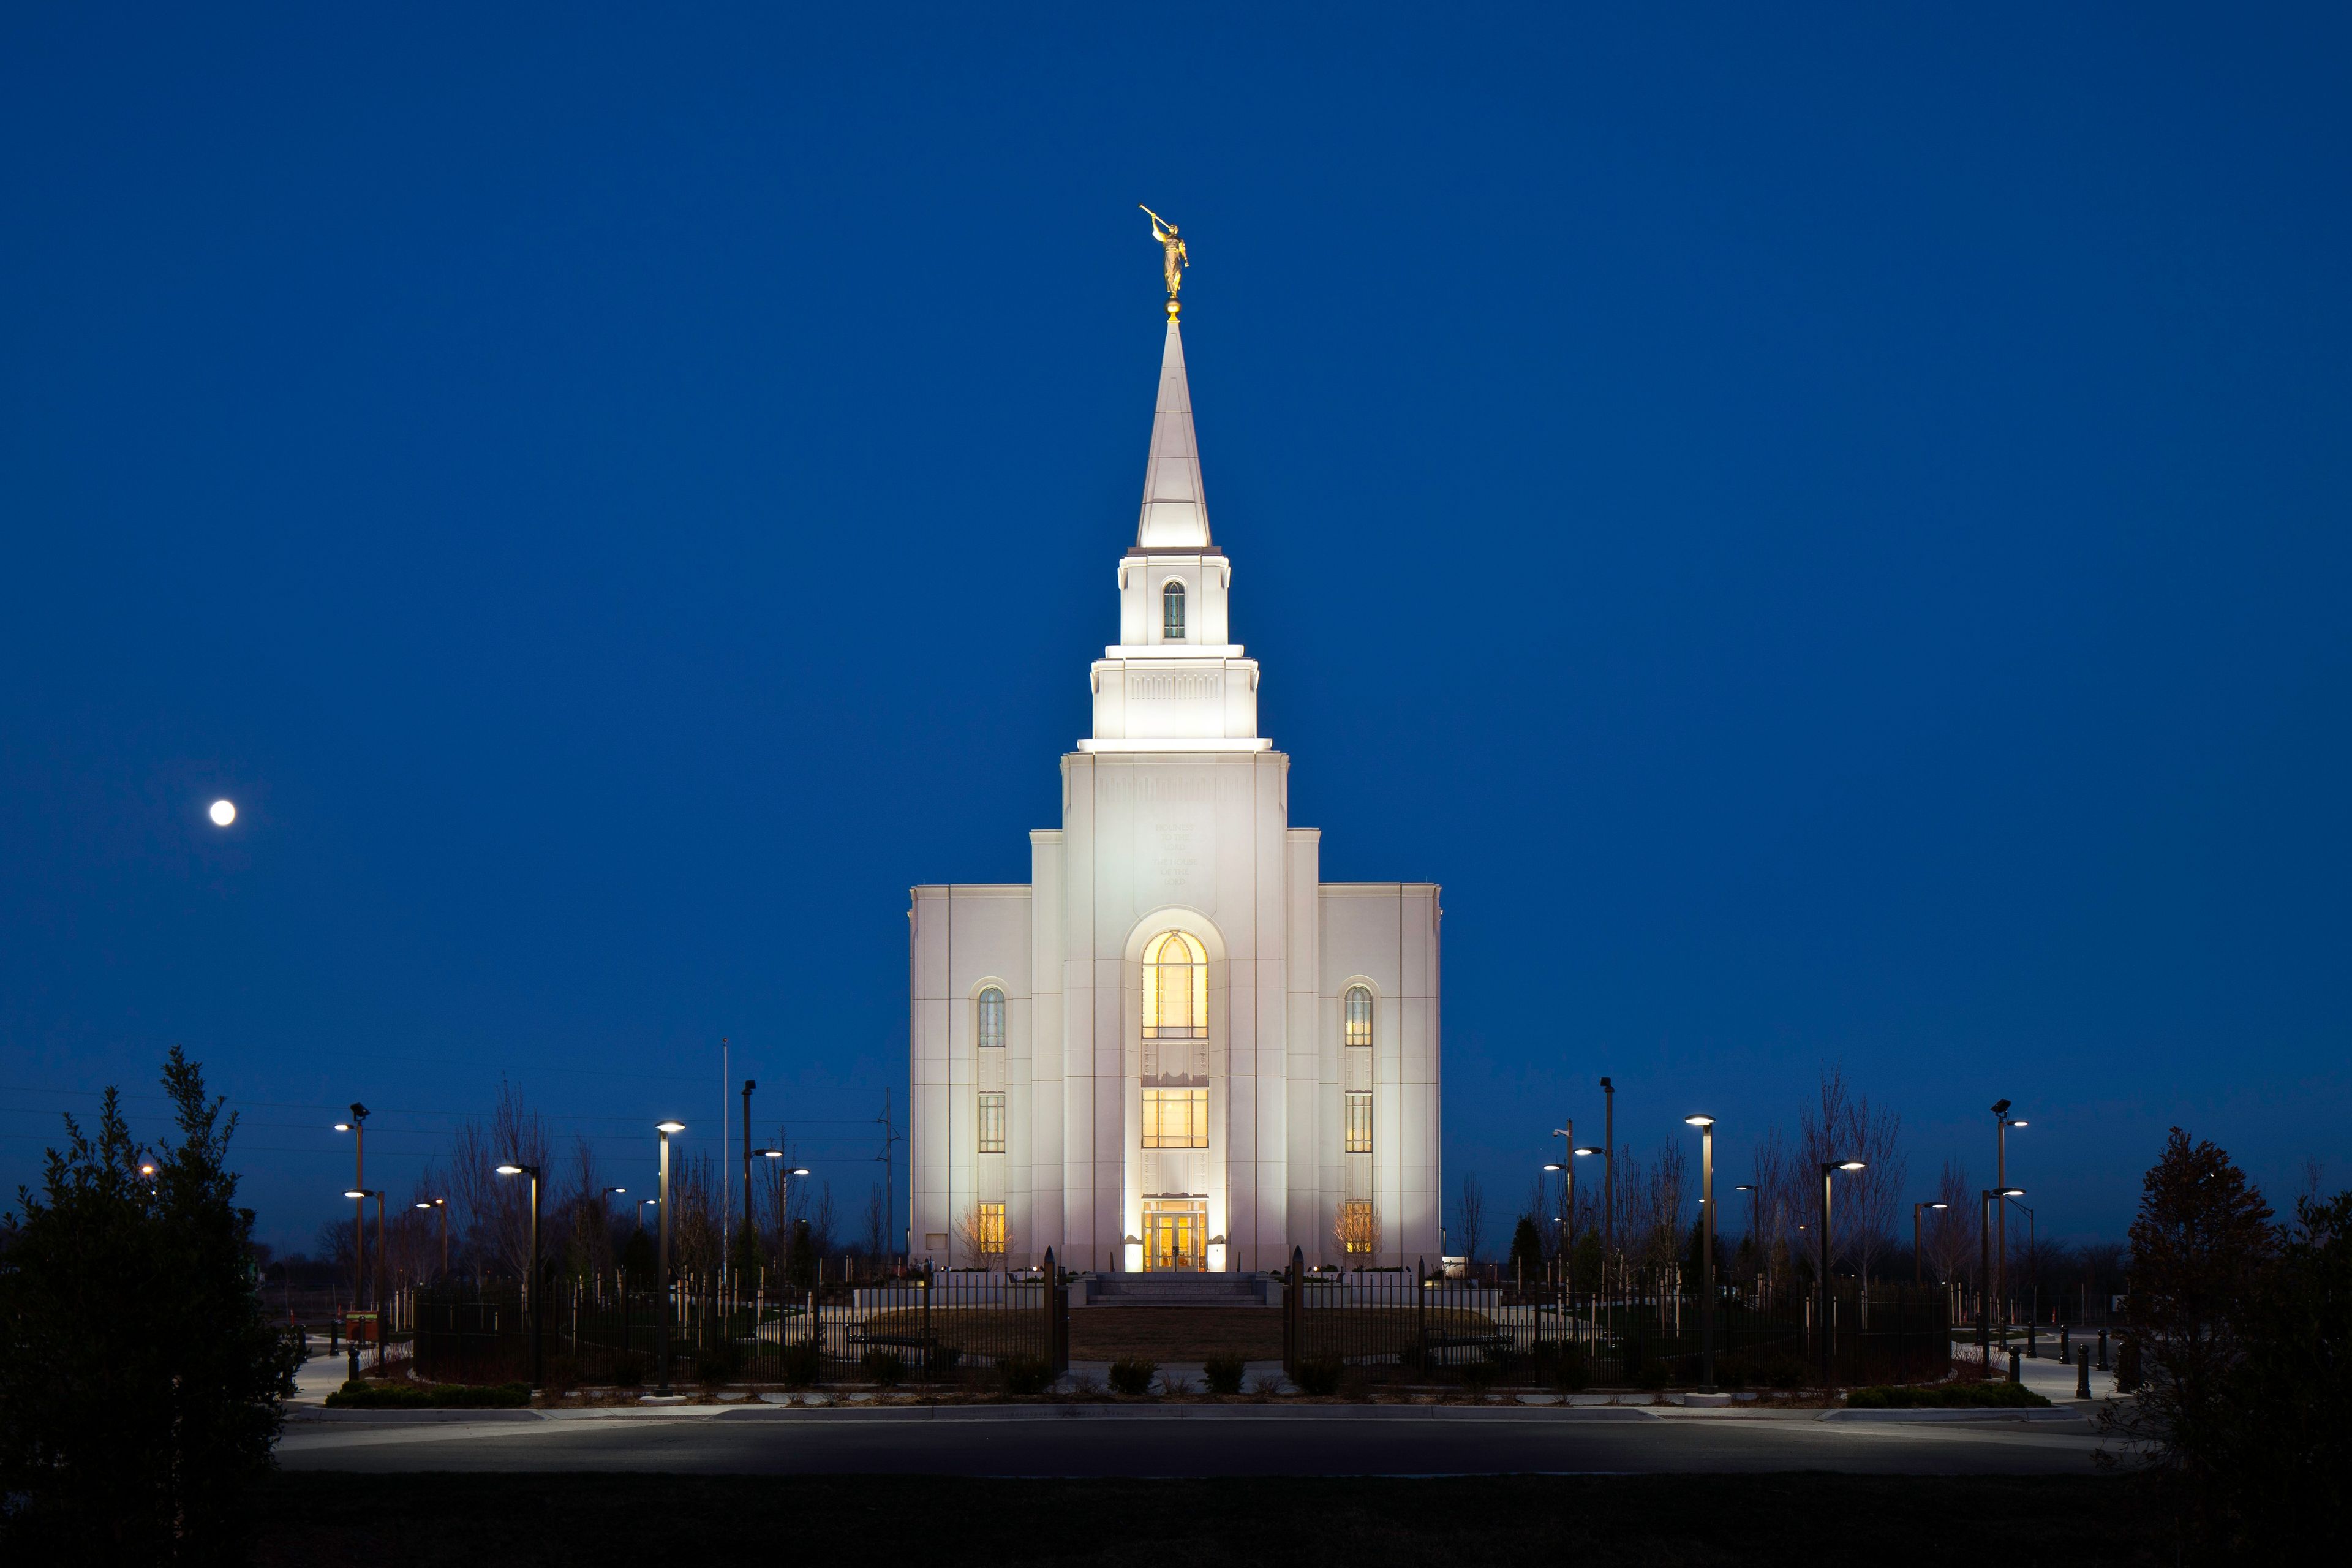 The Kansas City Missouri Temple lit up in the evening, including scenery.  